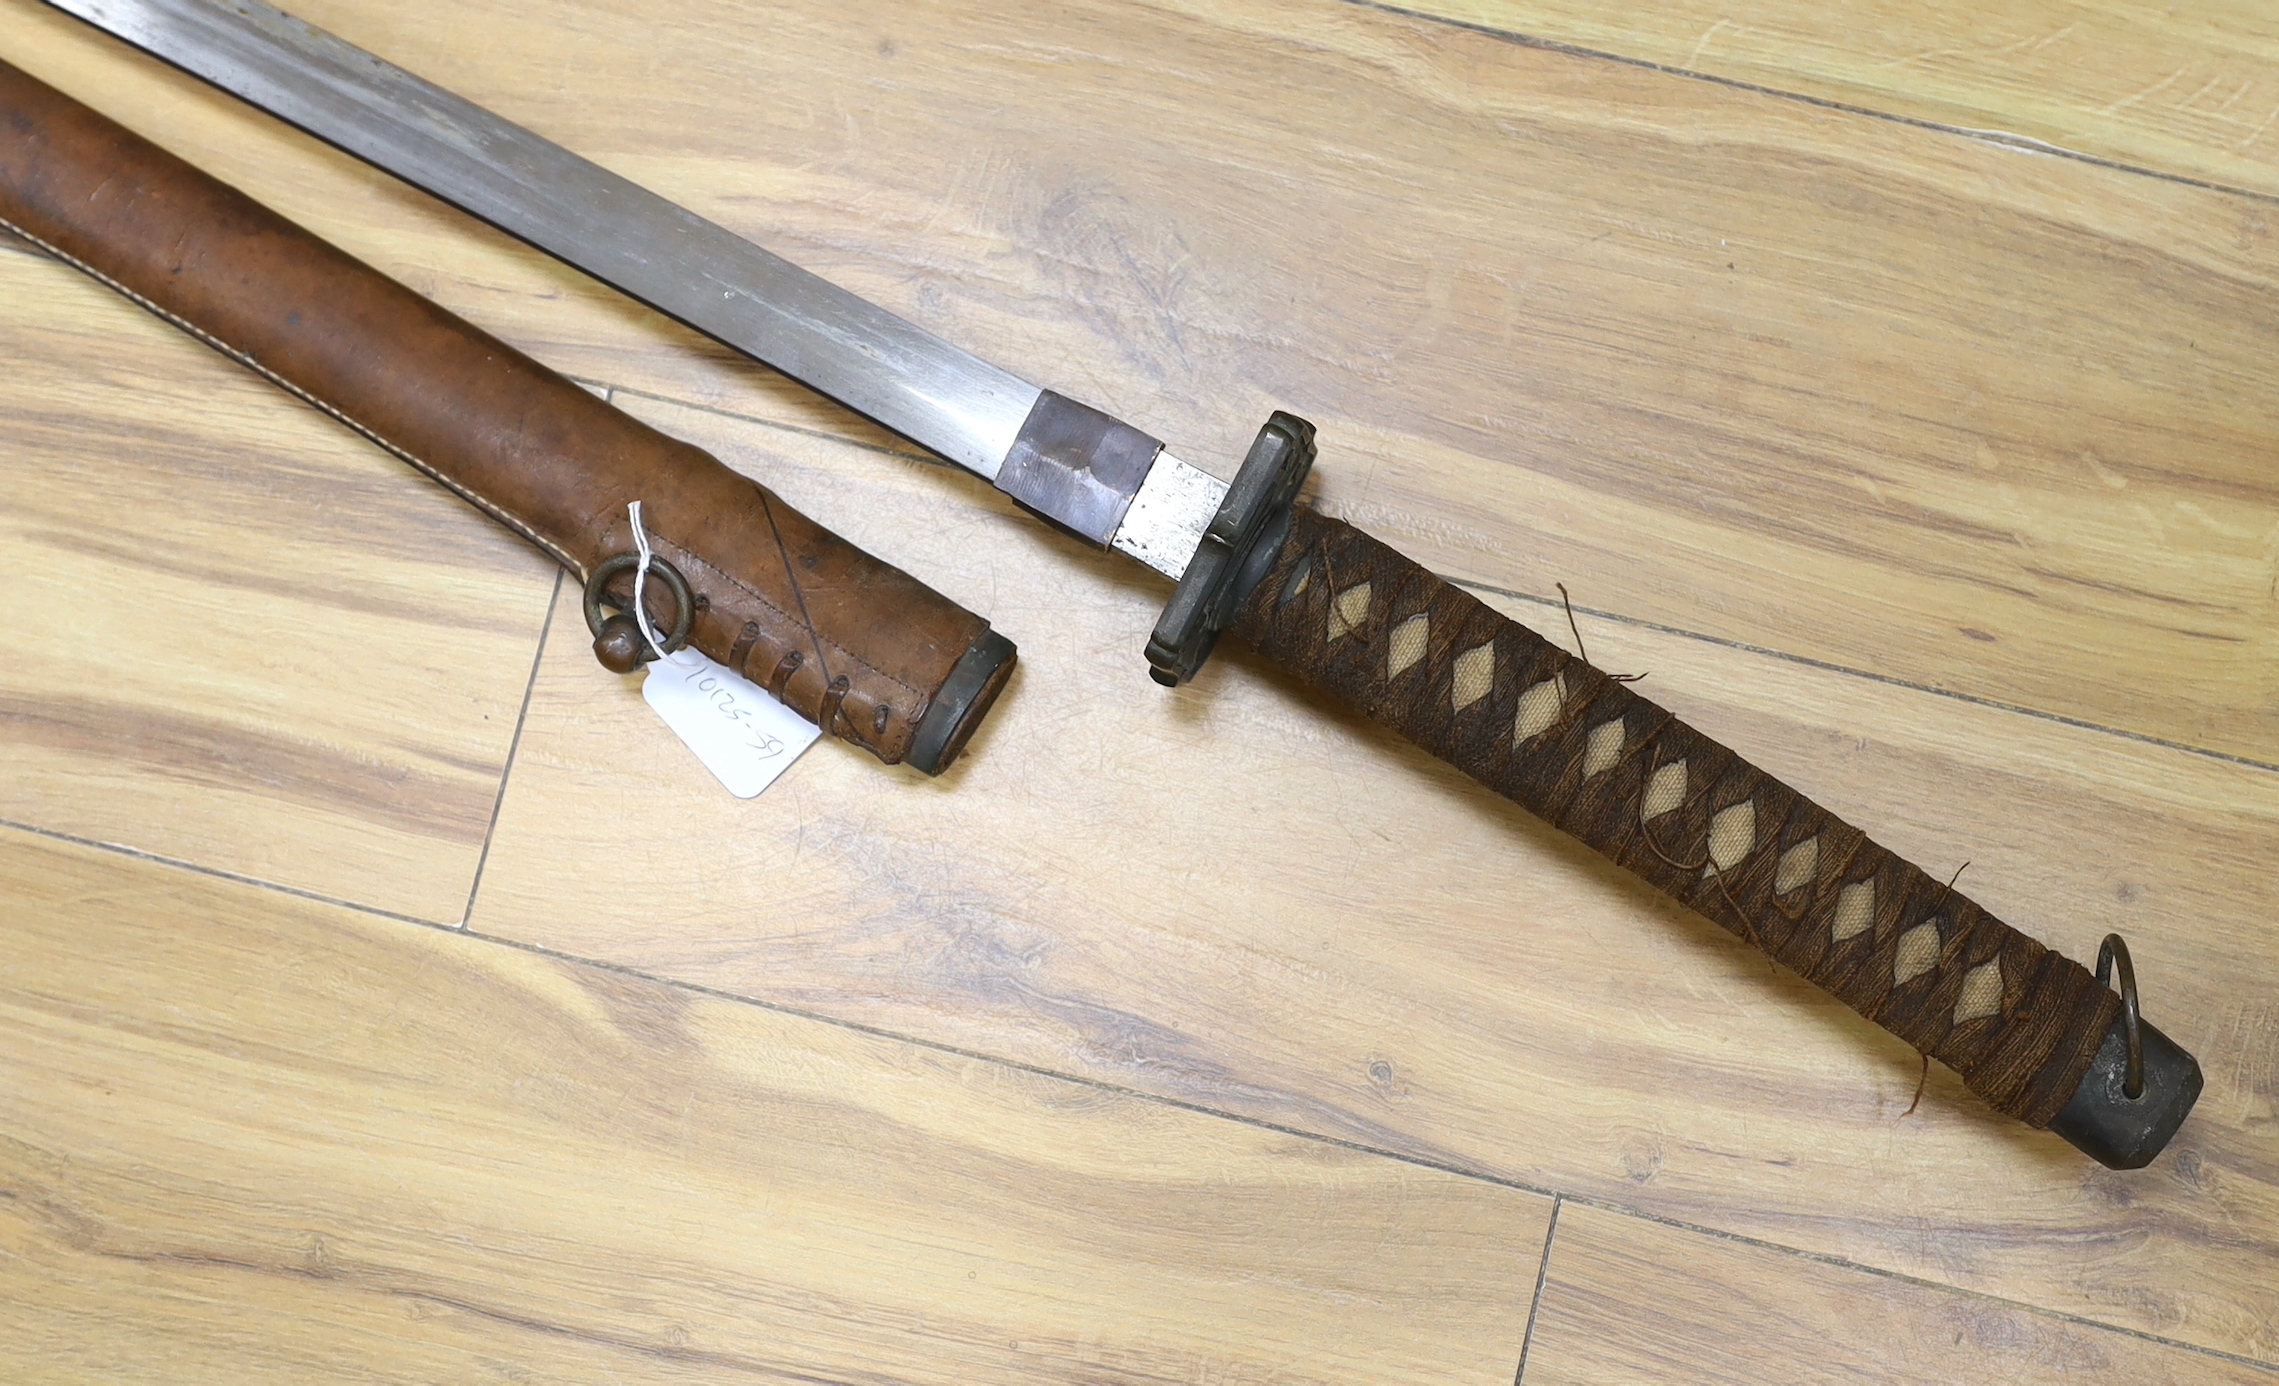 A Japanese WWII Shin gunto (sword) and leather mounted scabbard - Image 4 of 6